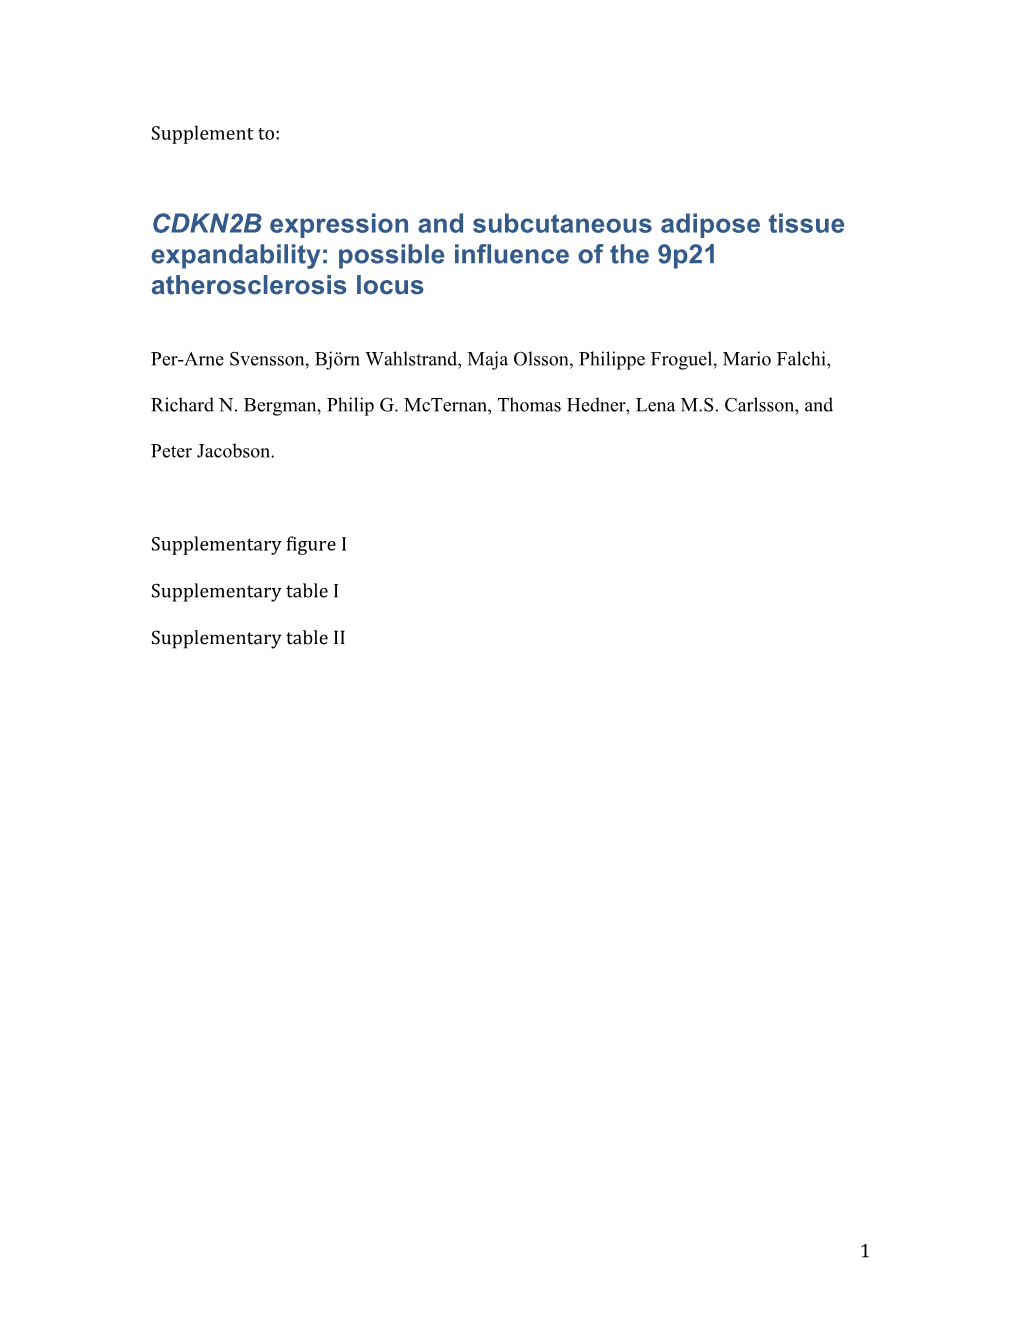 Cdkn2bexpression and Subcutaneous Adipose Tissue Expandability: Possible Influence of The